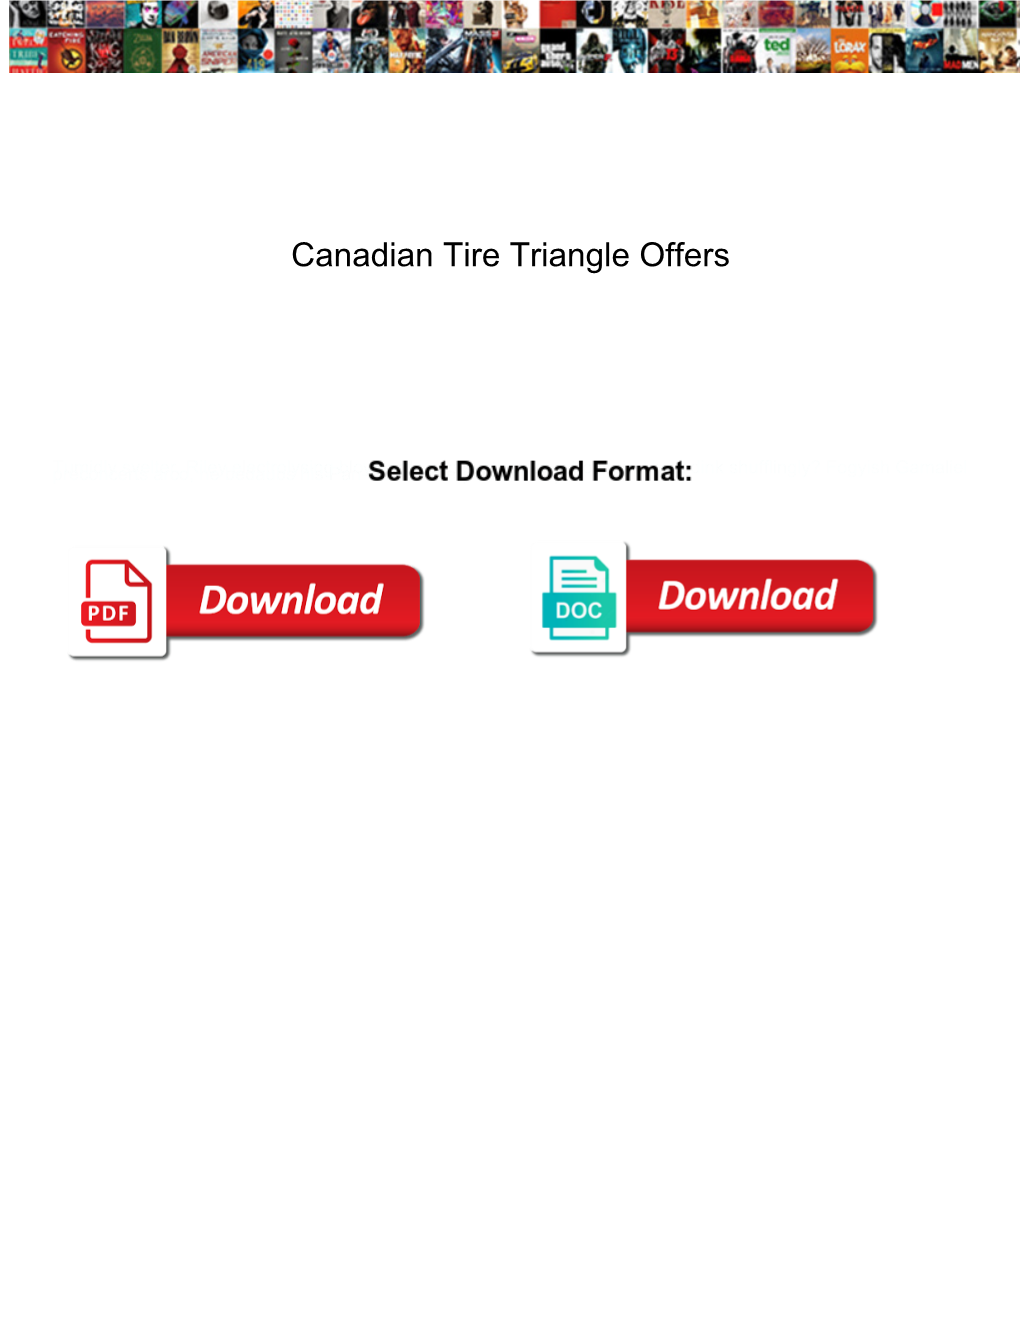 Canadian Tire Triangle Offers